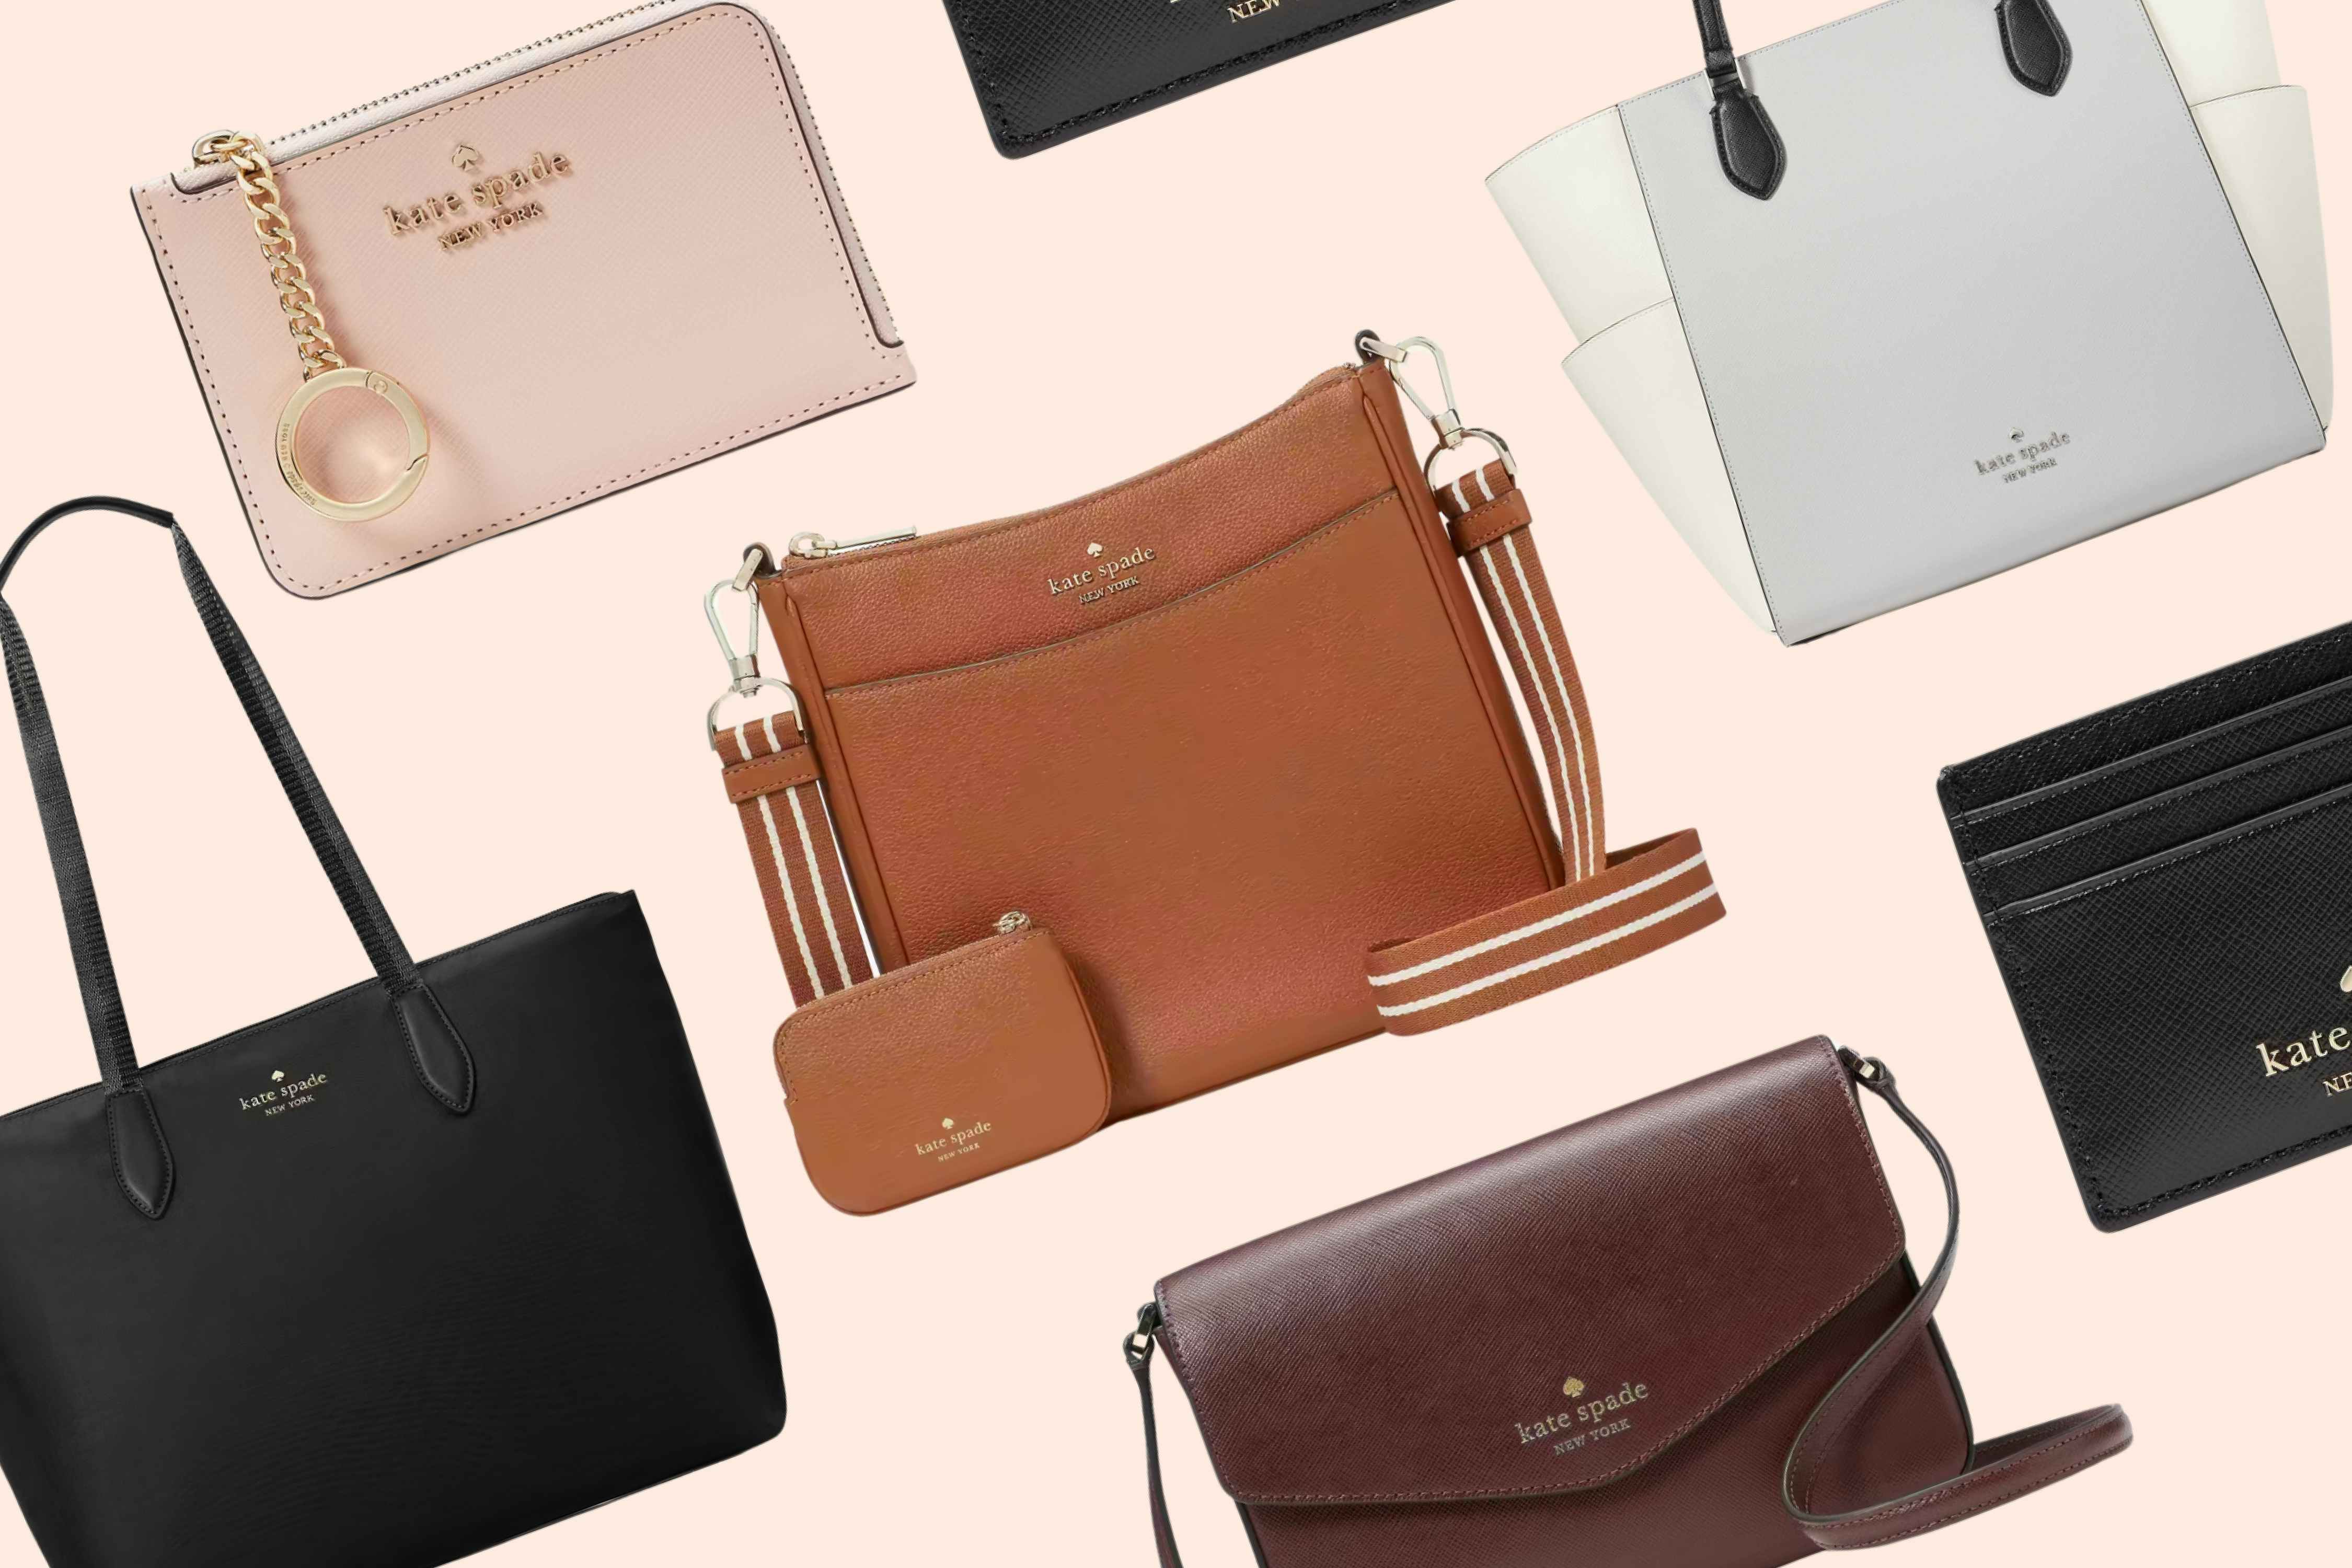 Huge Kate Spade Sale on 180+ Styles: $75 Leather Bag, $55 Leather Wallet